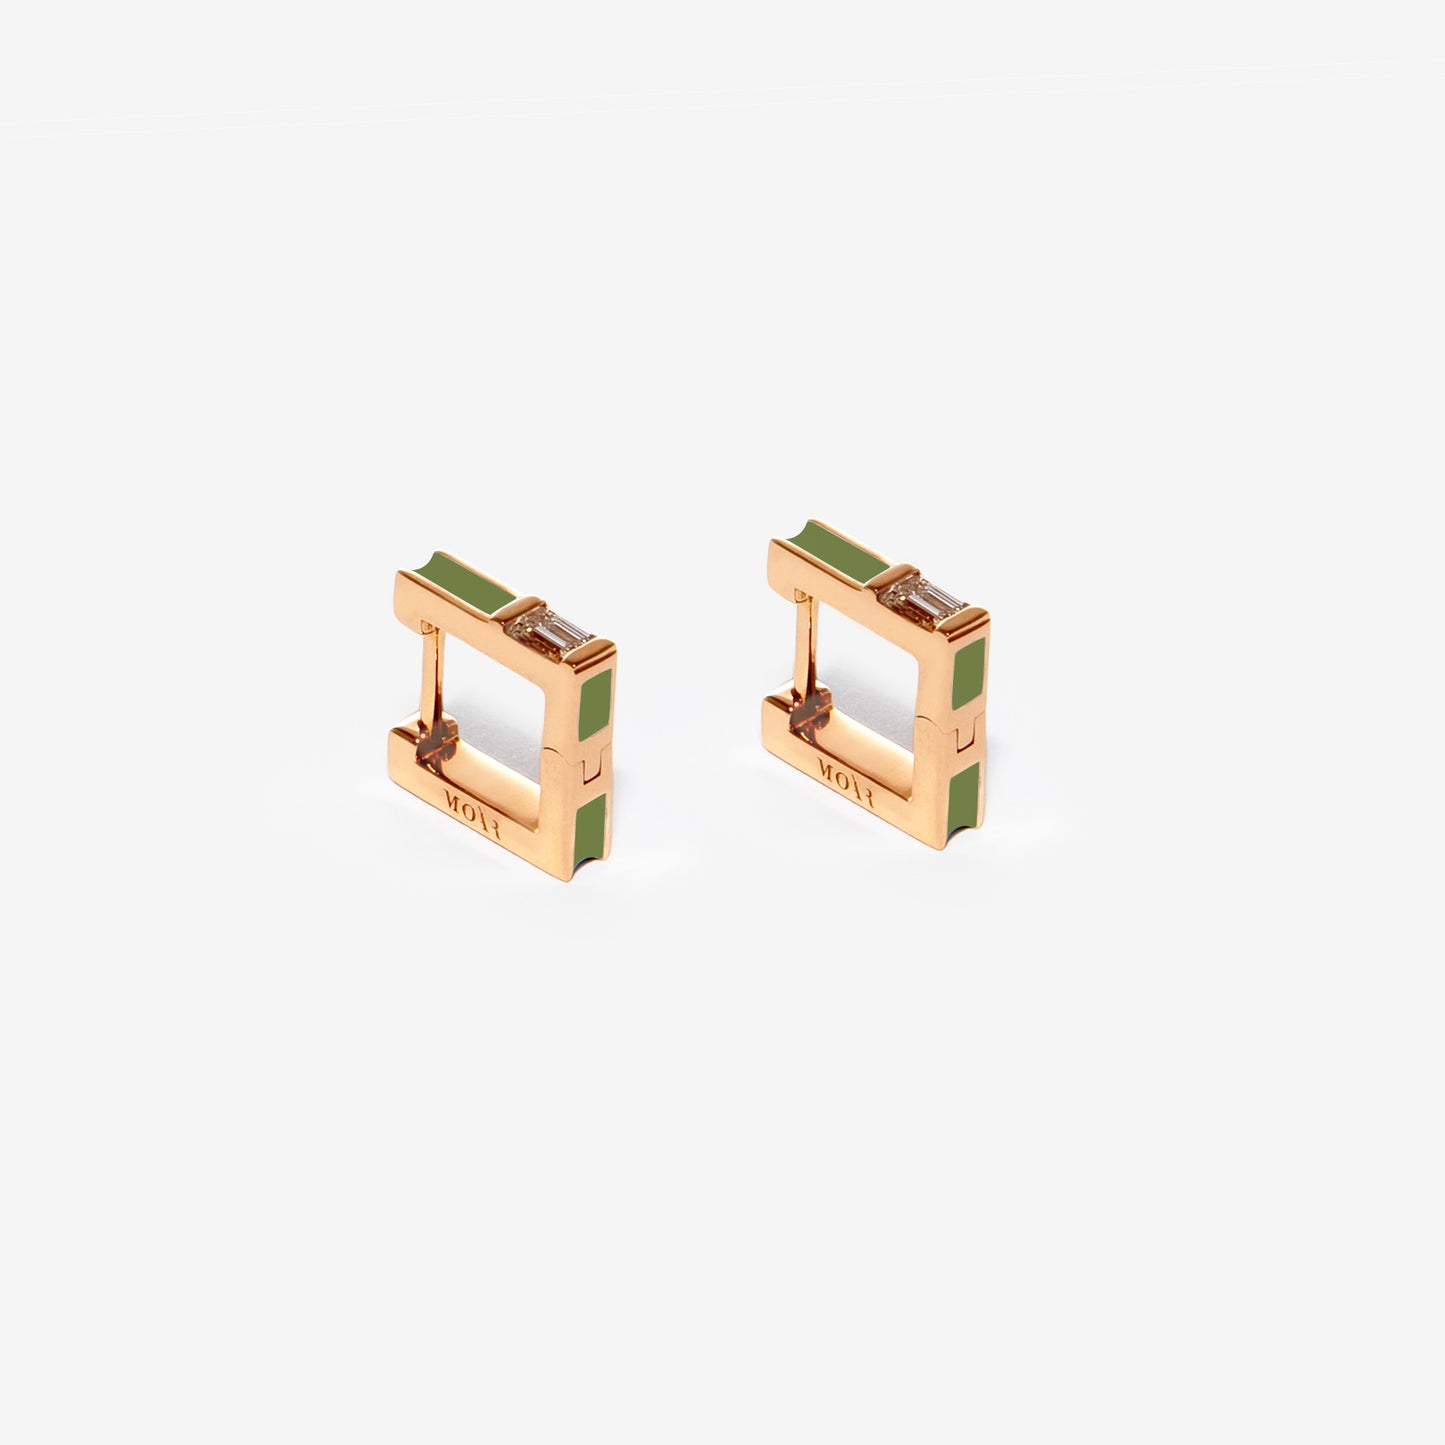 Green Square Earrings with Diamonds